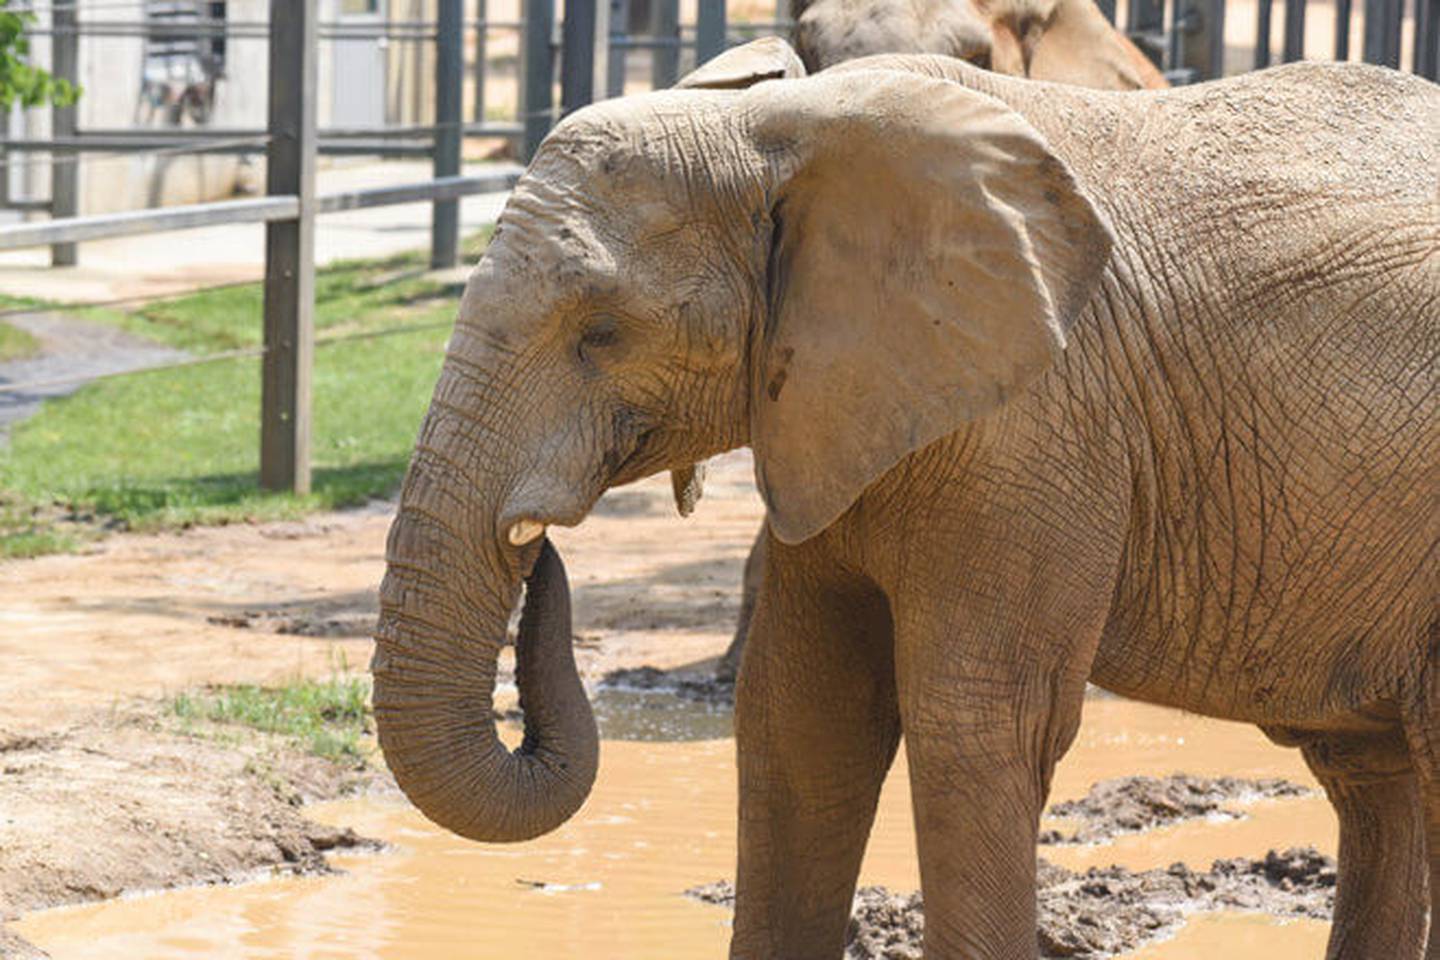 Samson the bull elephant is proving he’s lucky twice.
The 15-year-old African bull elephant at the Maryland Zoo survived a second bout with a strain of the Elephant Endotheliotropic Herpesvirus (EEHV6), the zoo said Friday in a statement.